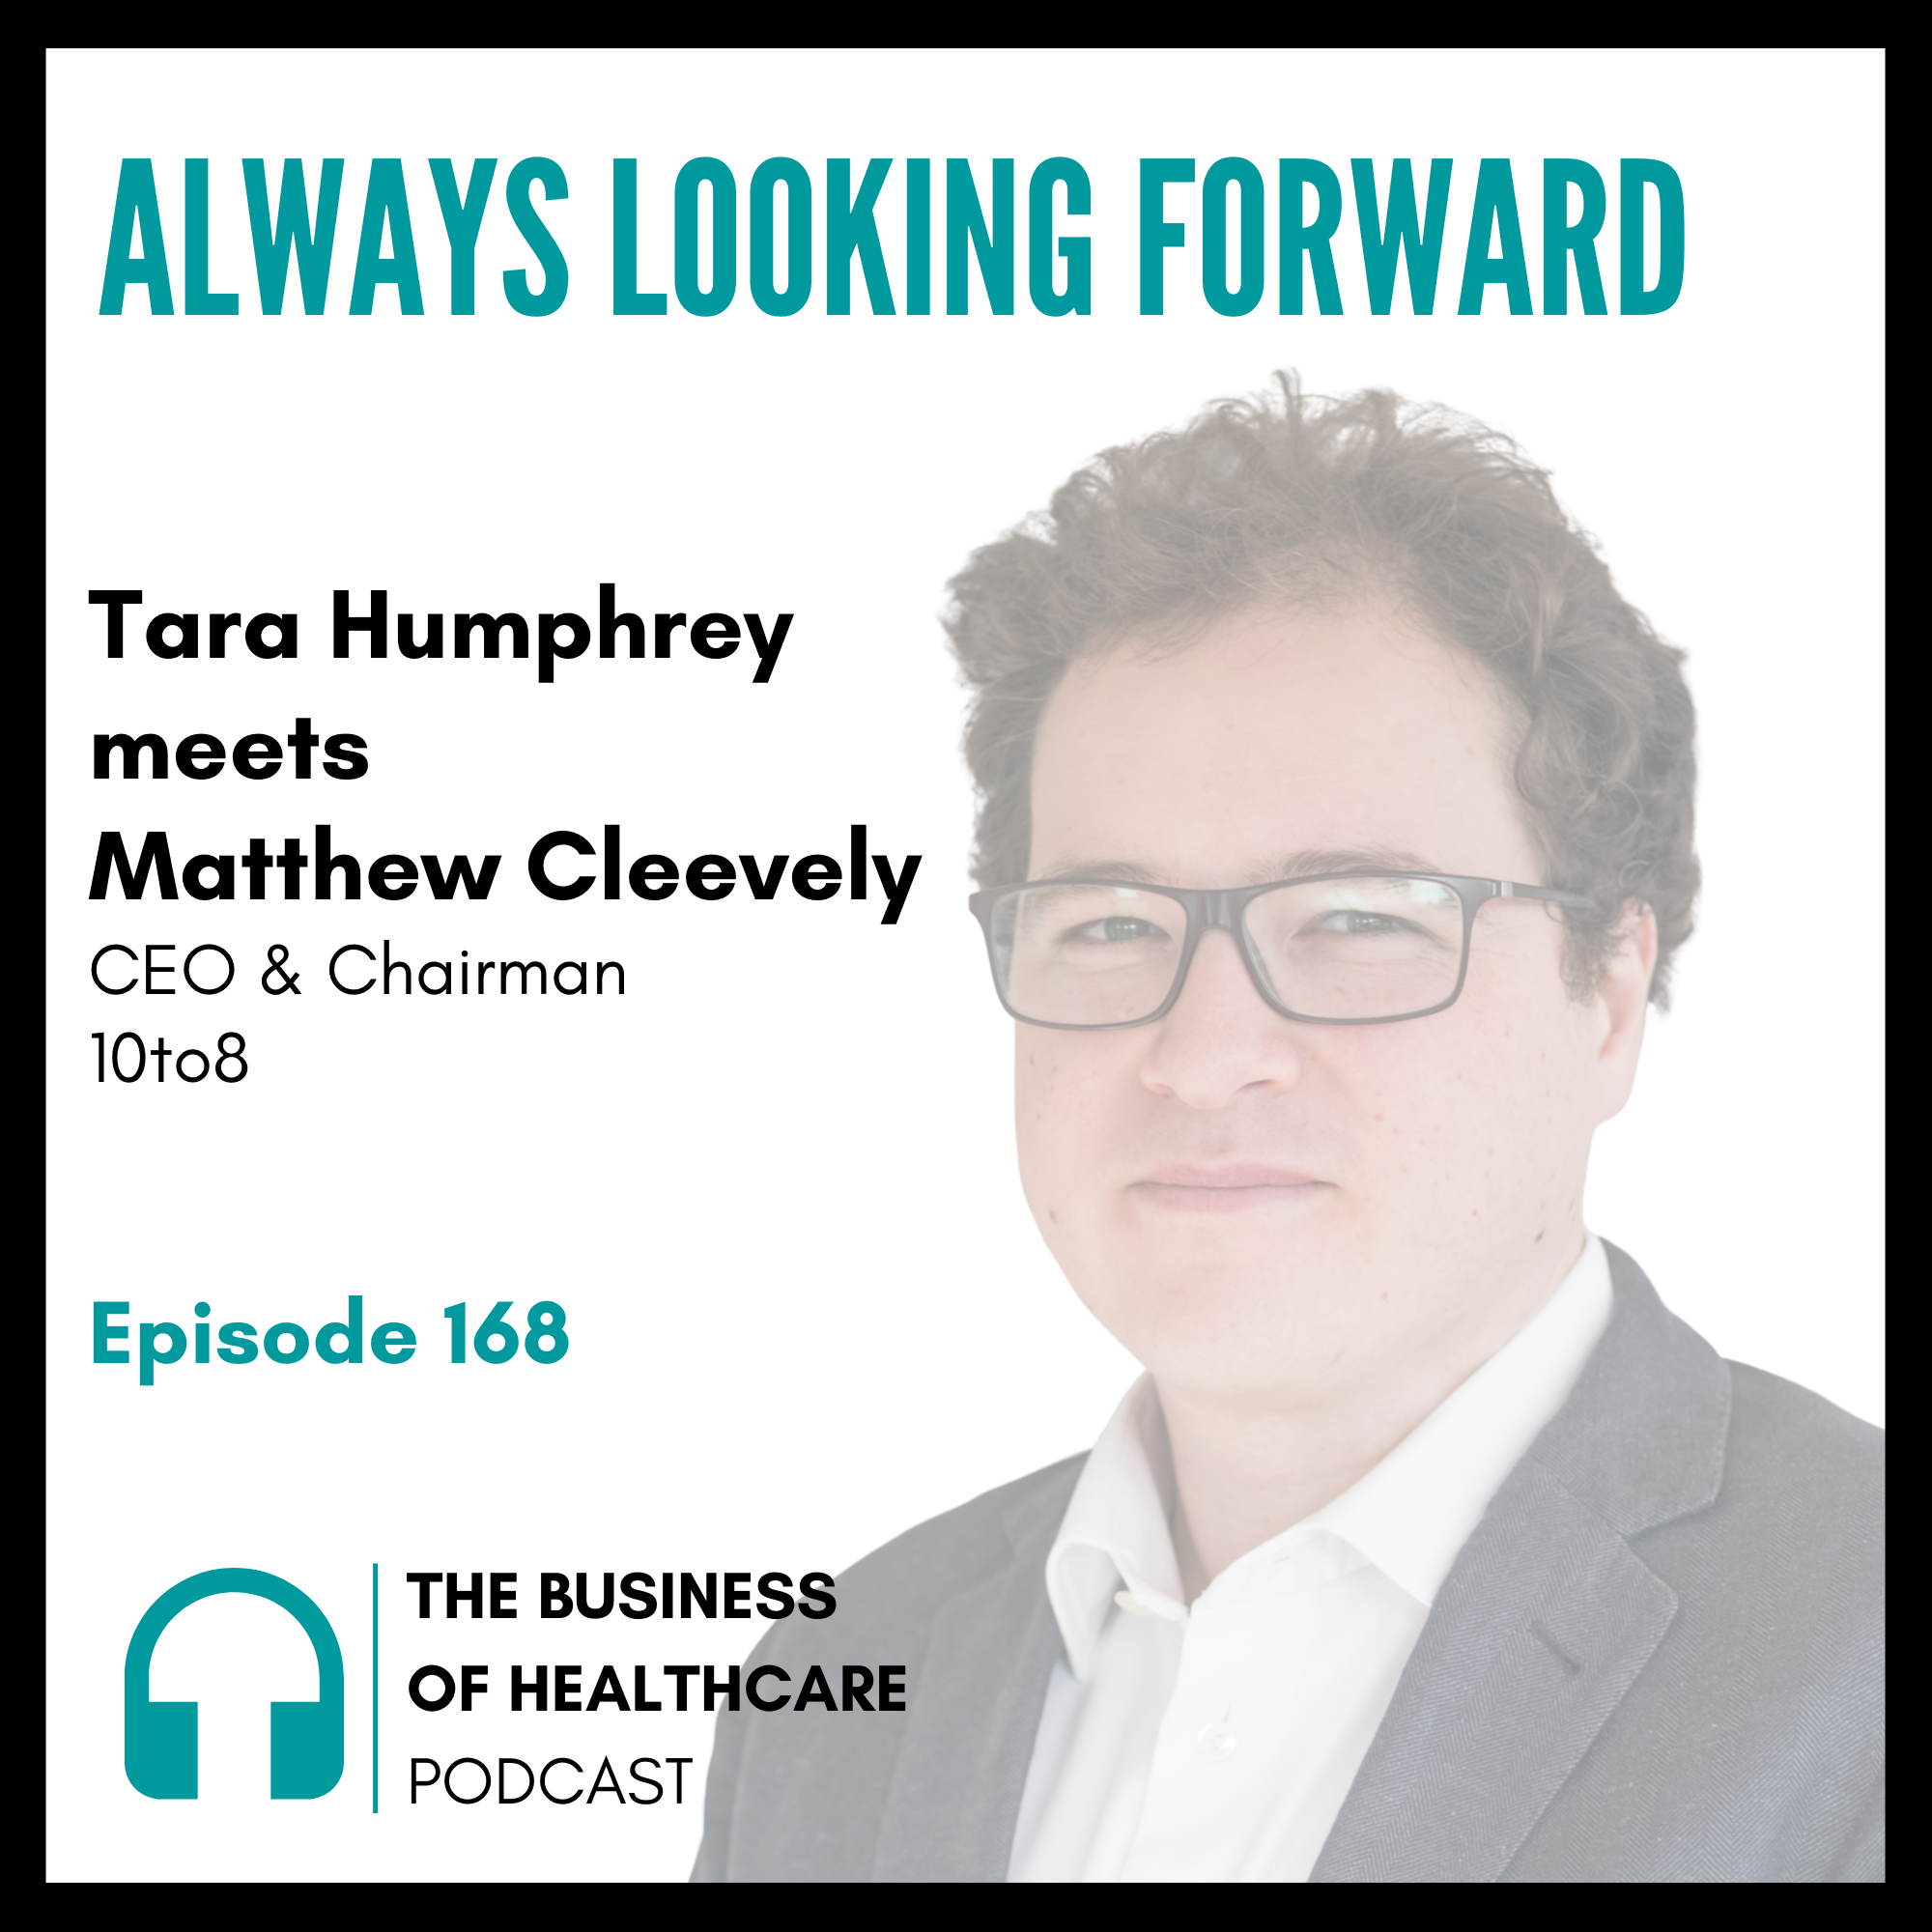 The Business of Healthcare with Tara Humphrey: #168 Always looking forward with Matthew Cleevely from 10to8